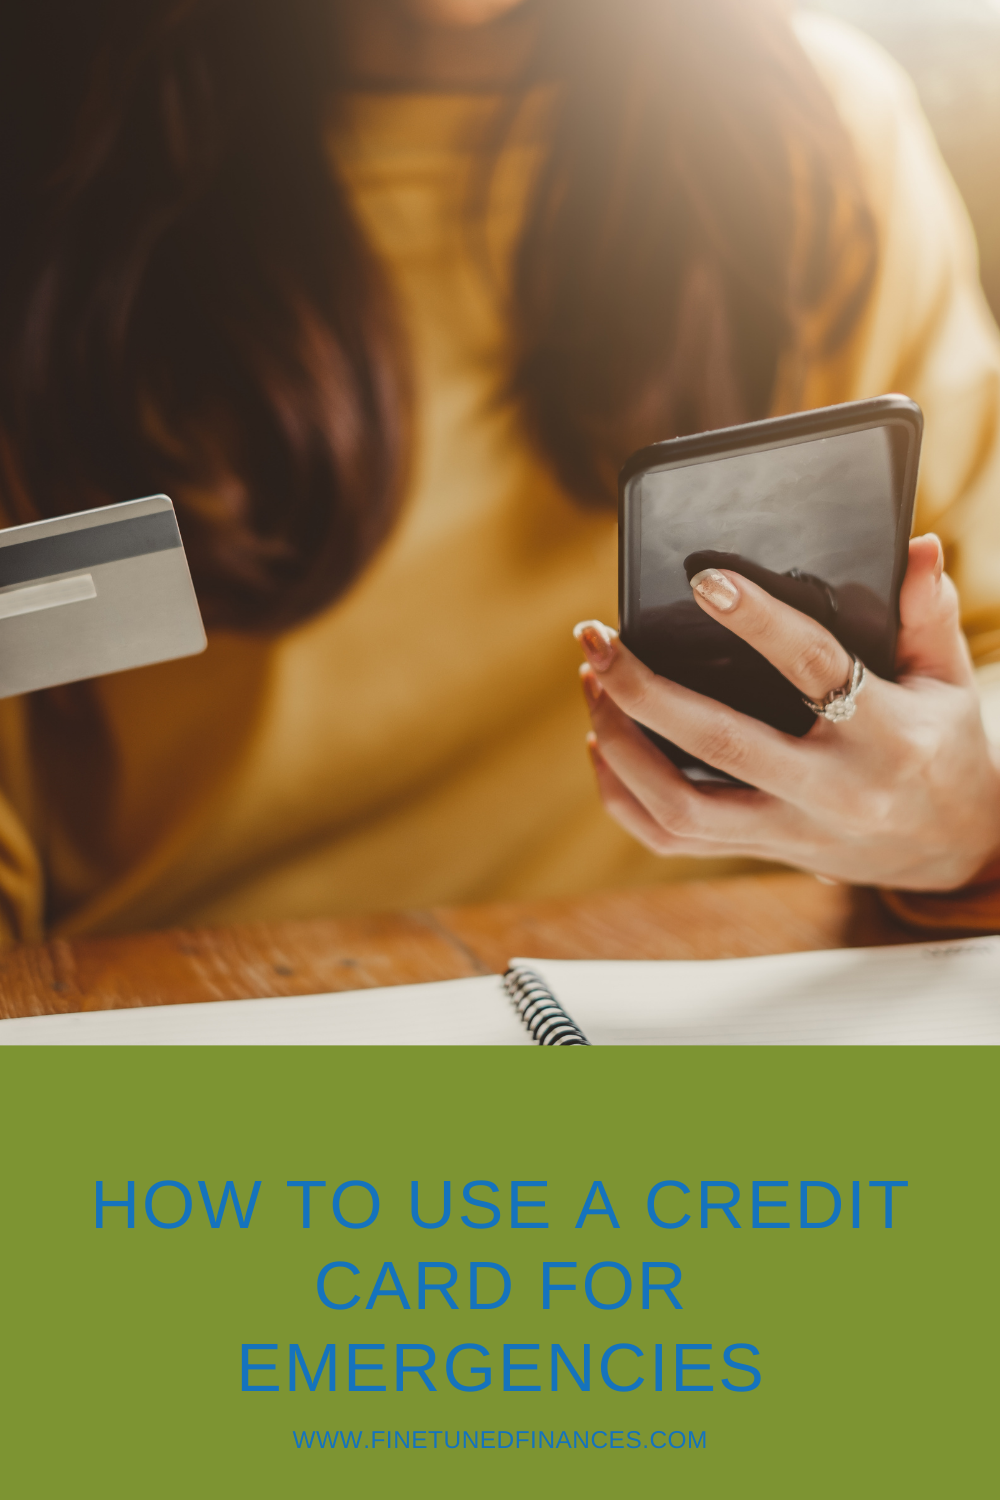 How To Use A Credit Card for Emergencies